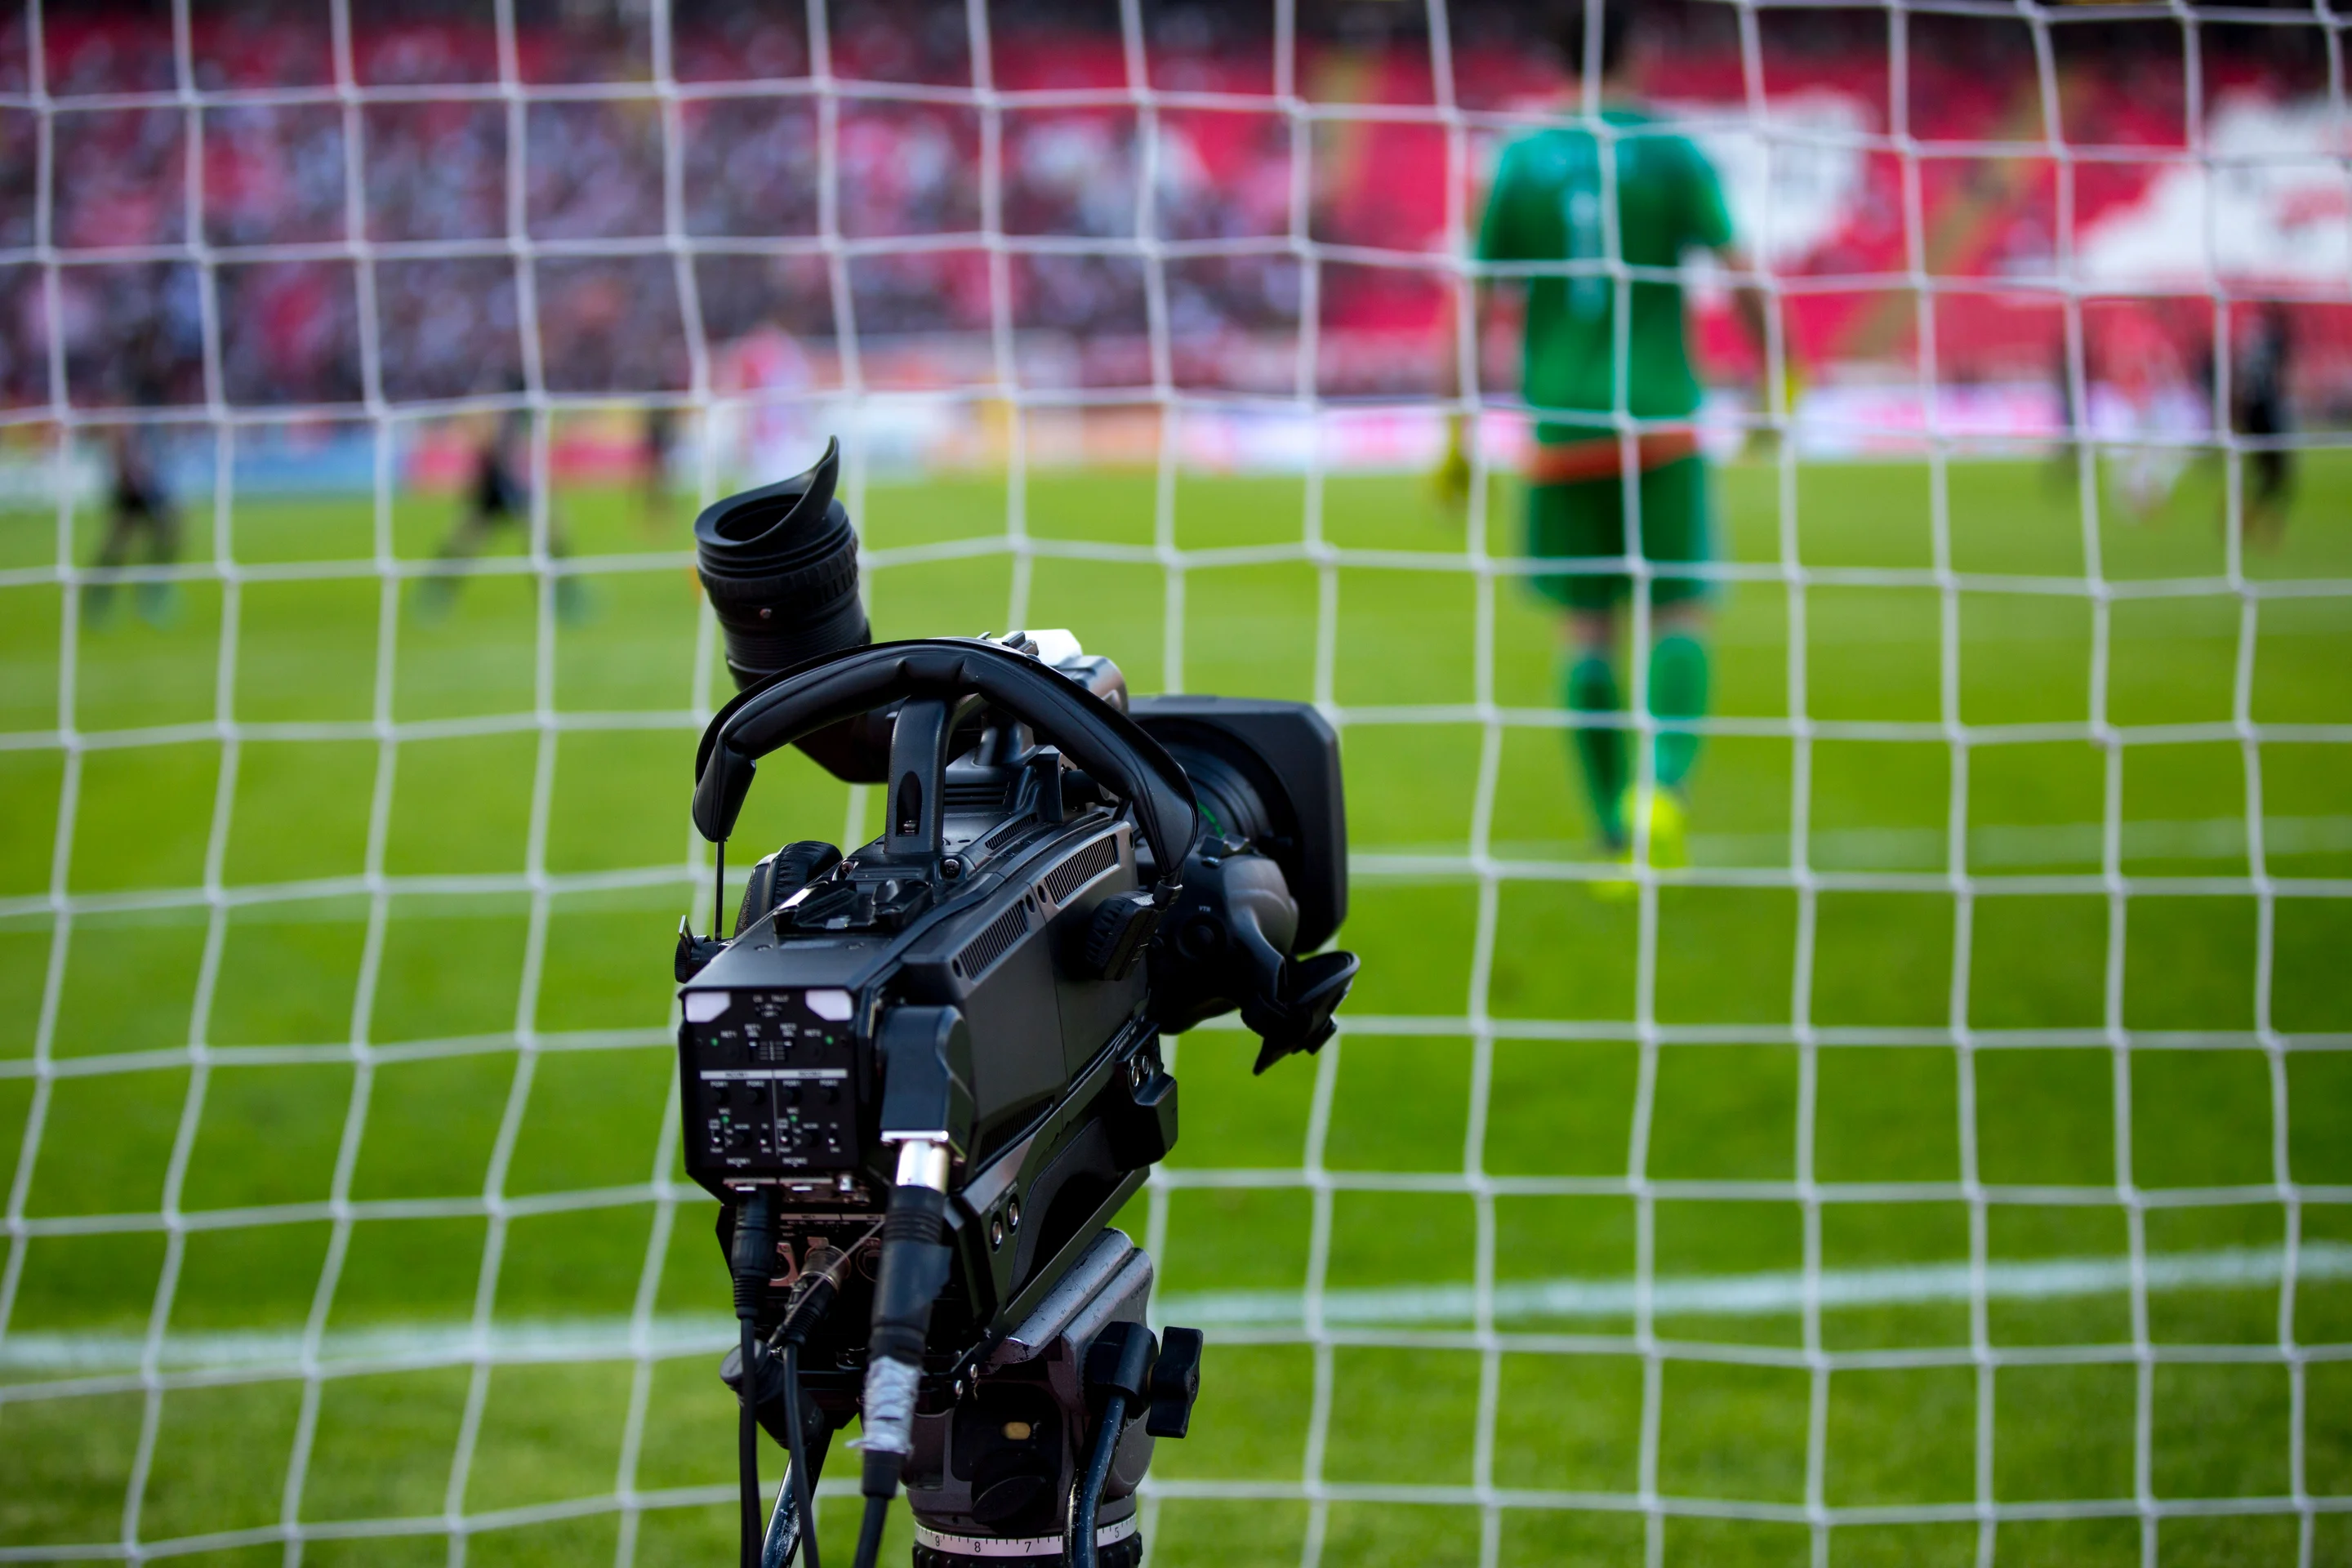 How can technology disrupt the sports TV rights model to give the power back to the fans?